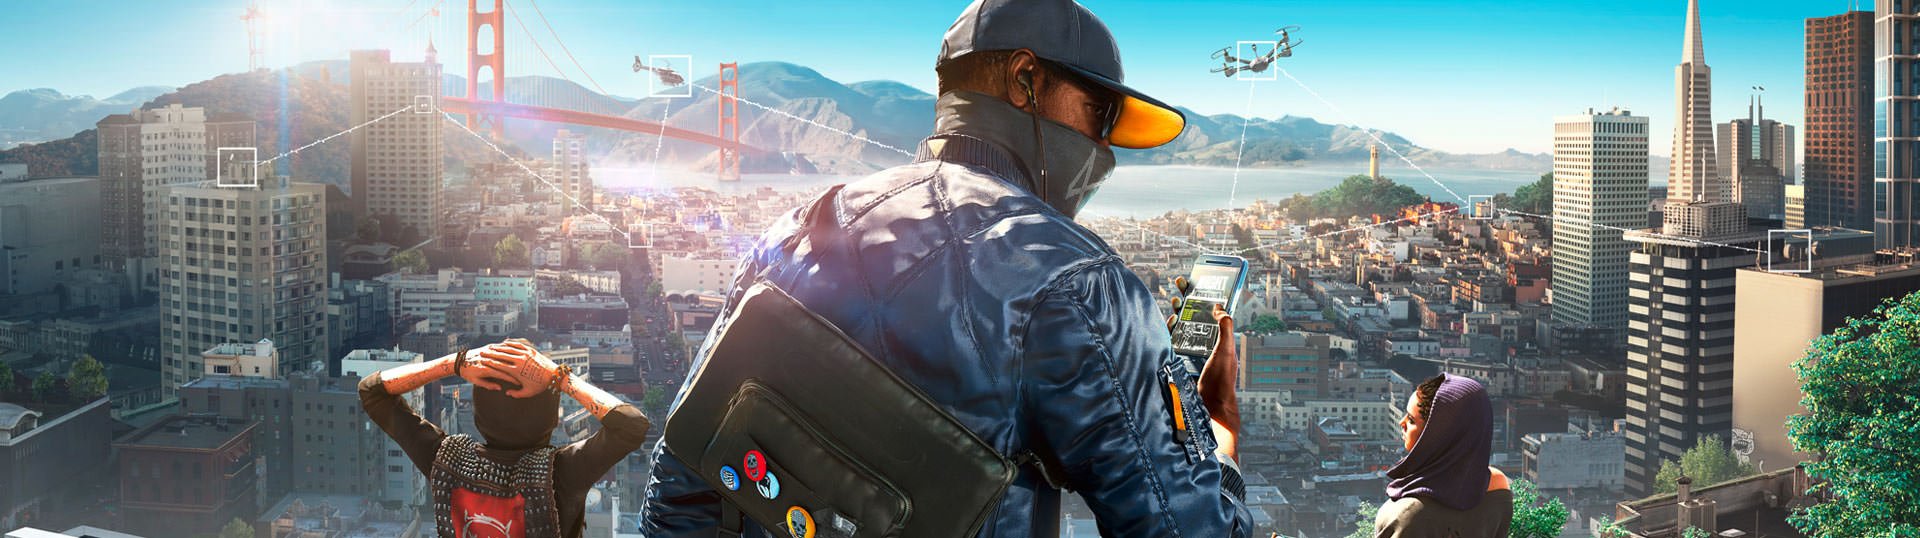 Watch Dogs®2 Mega Pack DLC | Ubisoft Official Store